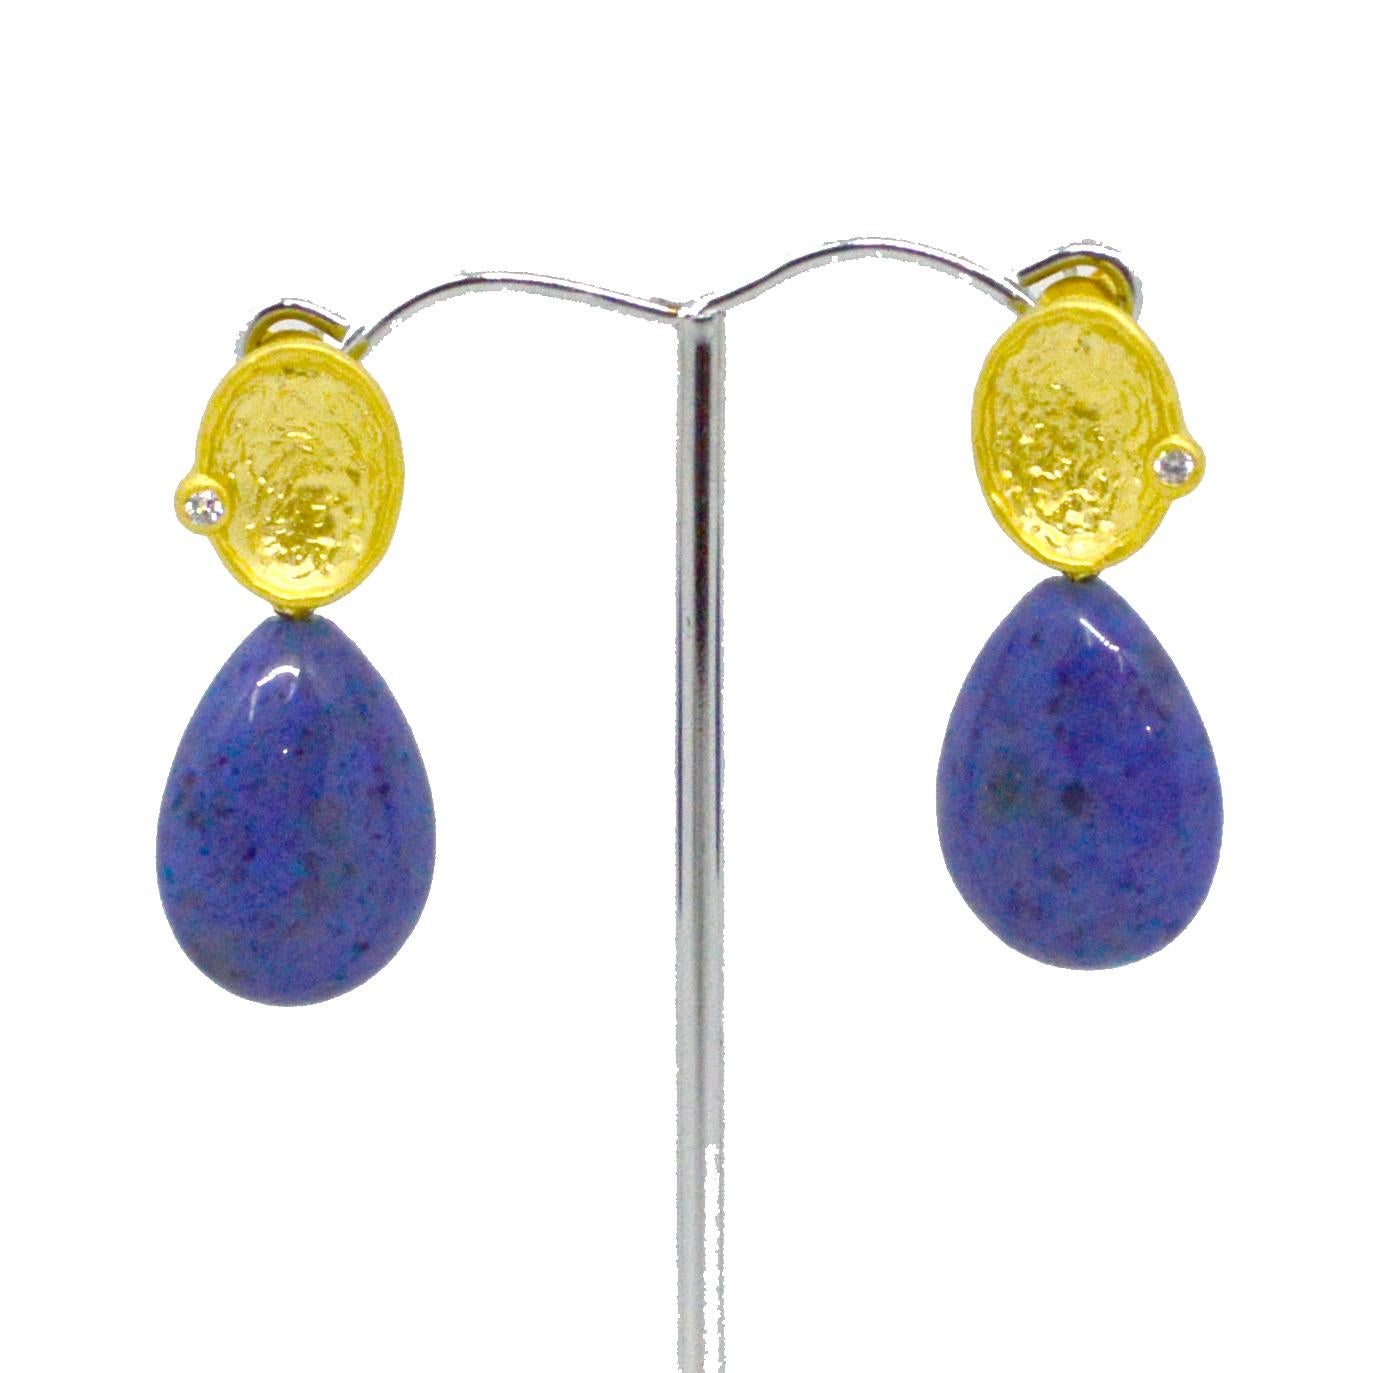 15x20mm Polished Dumortierite Teardrop beads with a 11x14mm Gold plate brass stud with a Sterling Silver post. 14k Gold Filled post.

Total Earring length 35mm.
